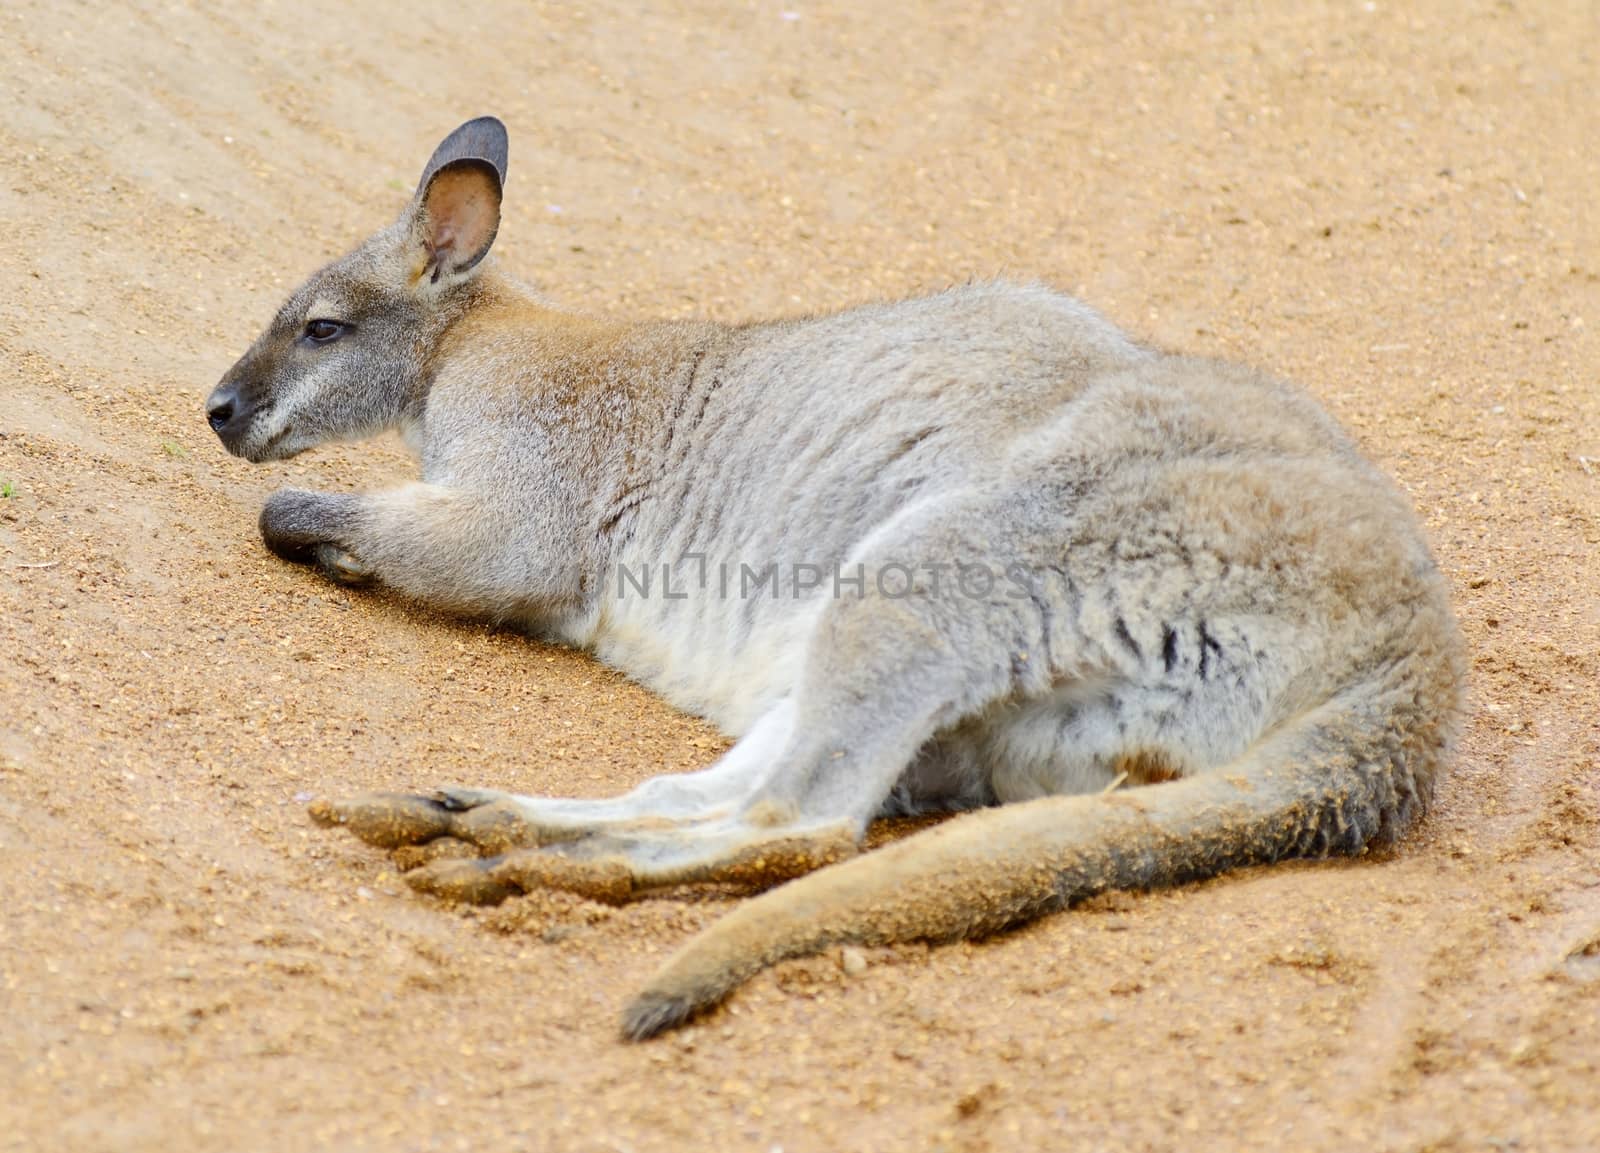 A lone wallaby laying on the ground resting